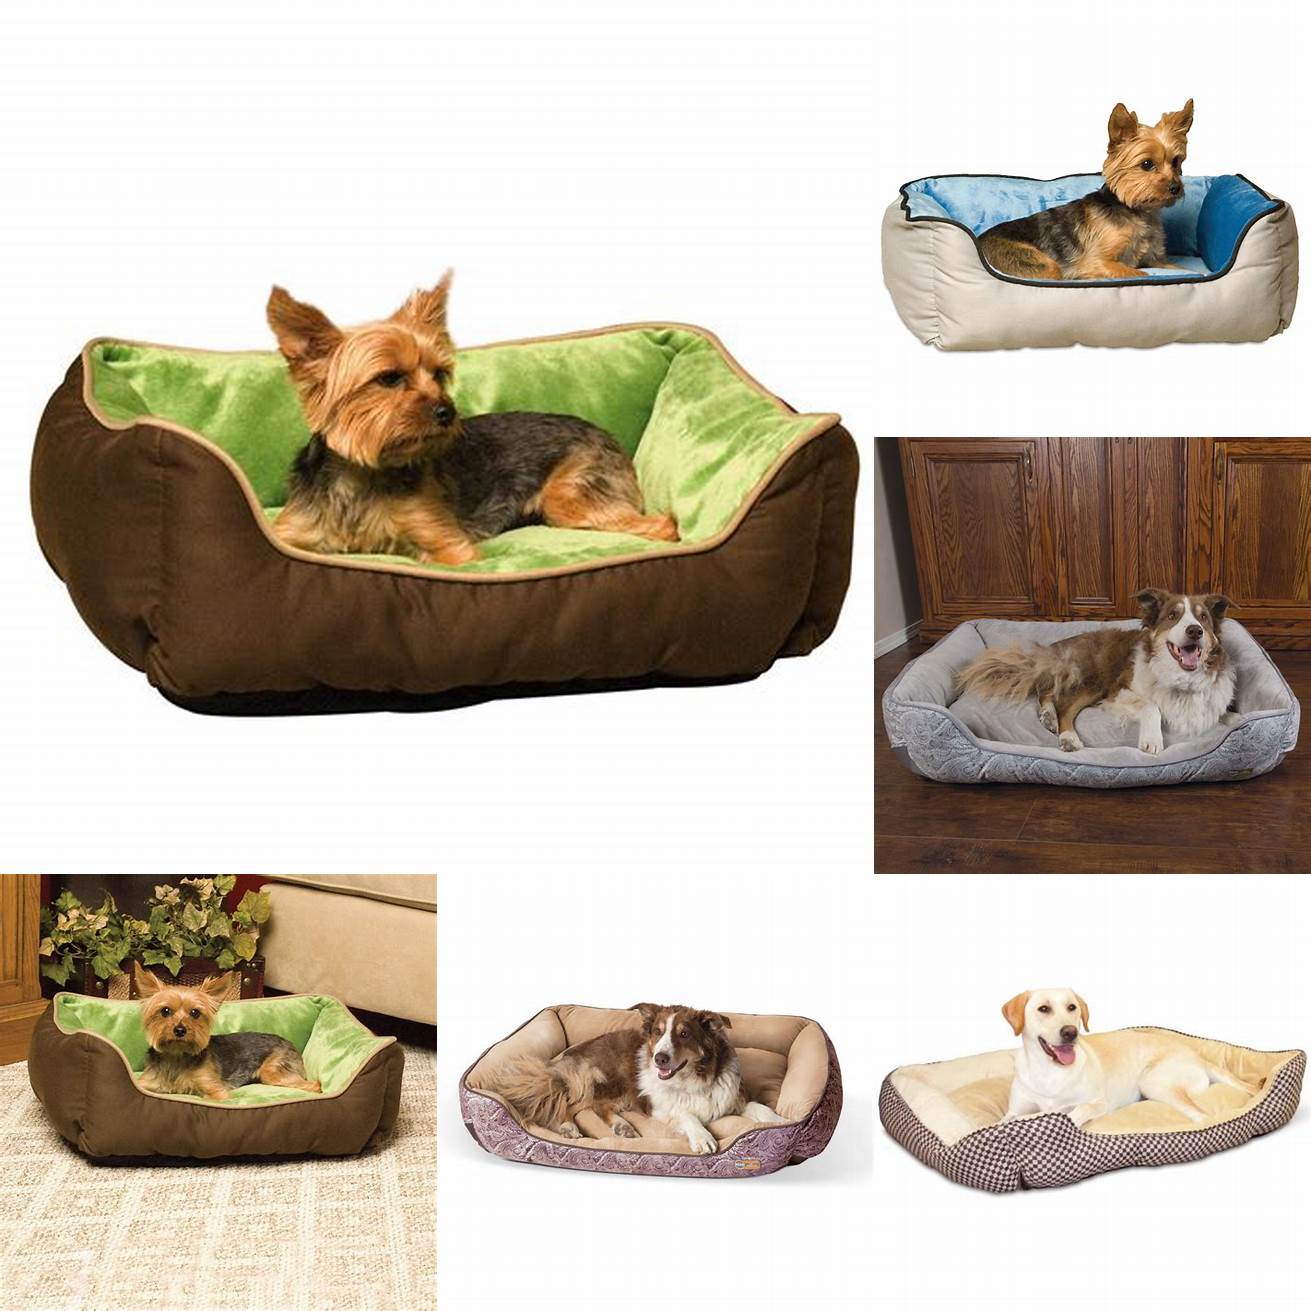 The KH Pet Products Self-Warming Lounge Sleeper is a great choice for dogs who like to be cozy